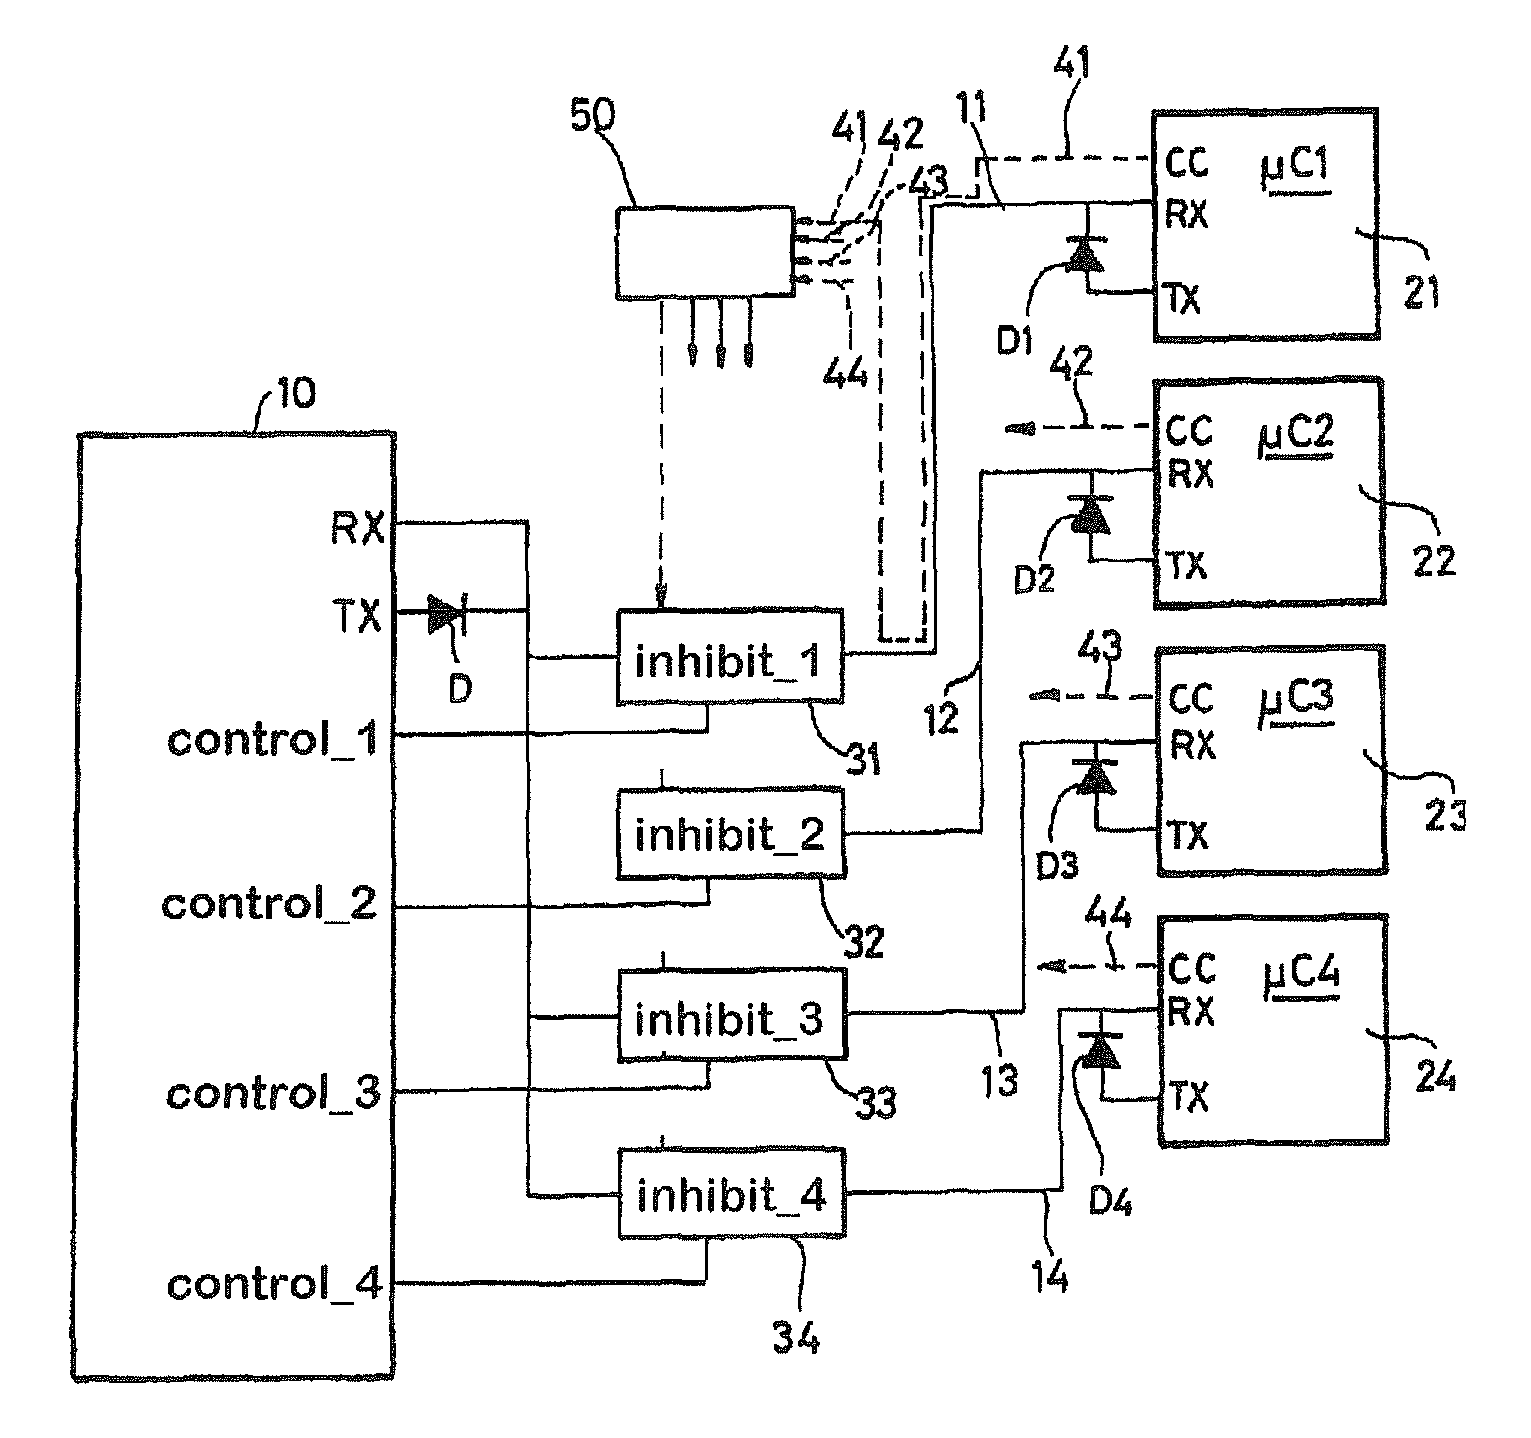 Method of synchronized control of electric motors of a remote-controlled rotary wing drone such as a quadricopter